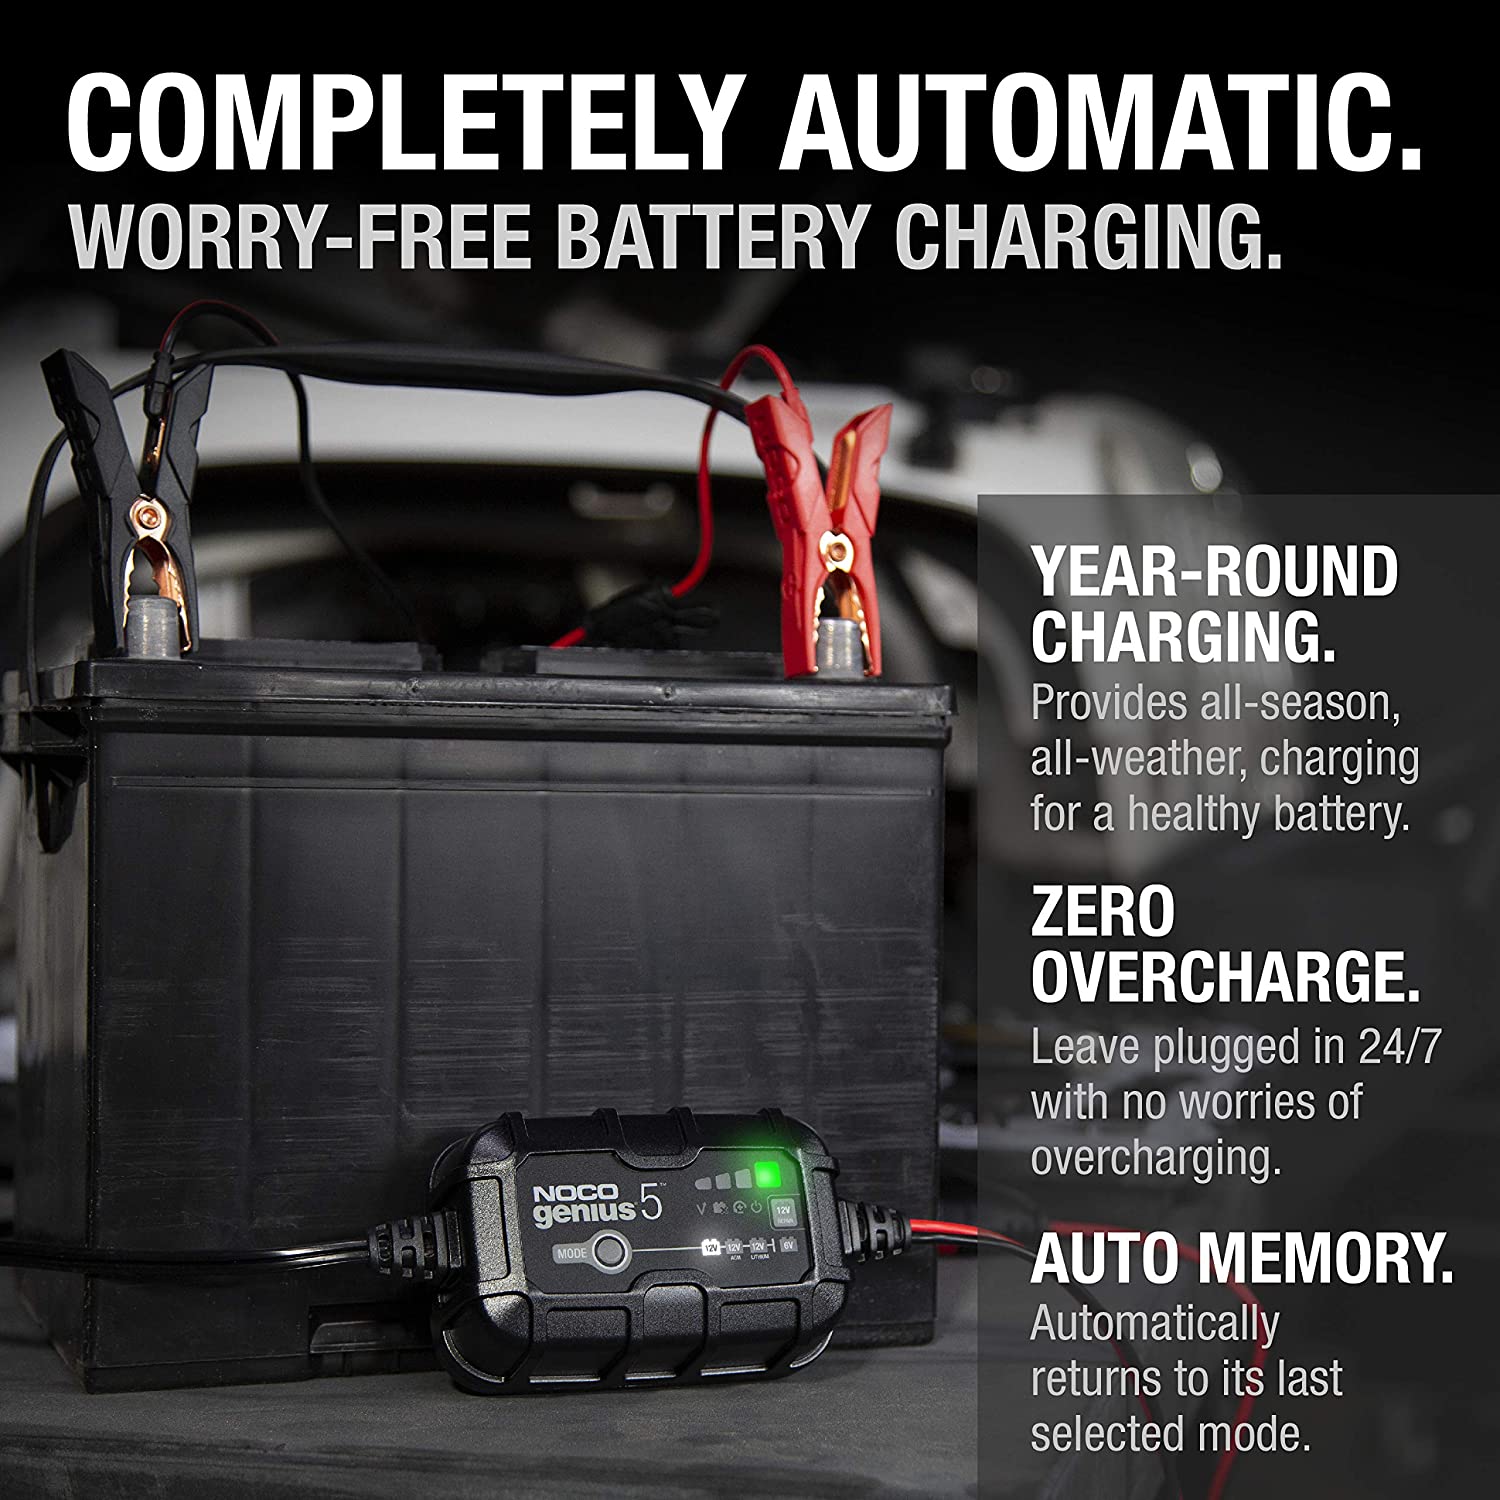 CHARGE BOTH 6V AND 12V BATTERIES WITHOUT HAVING TO MAKE A SELECTION!   OptiMate's industry leading Voltmatic technology makes it easy for you to  charge both 6V and 12V batteries without having